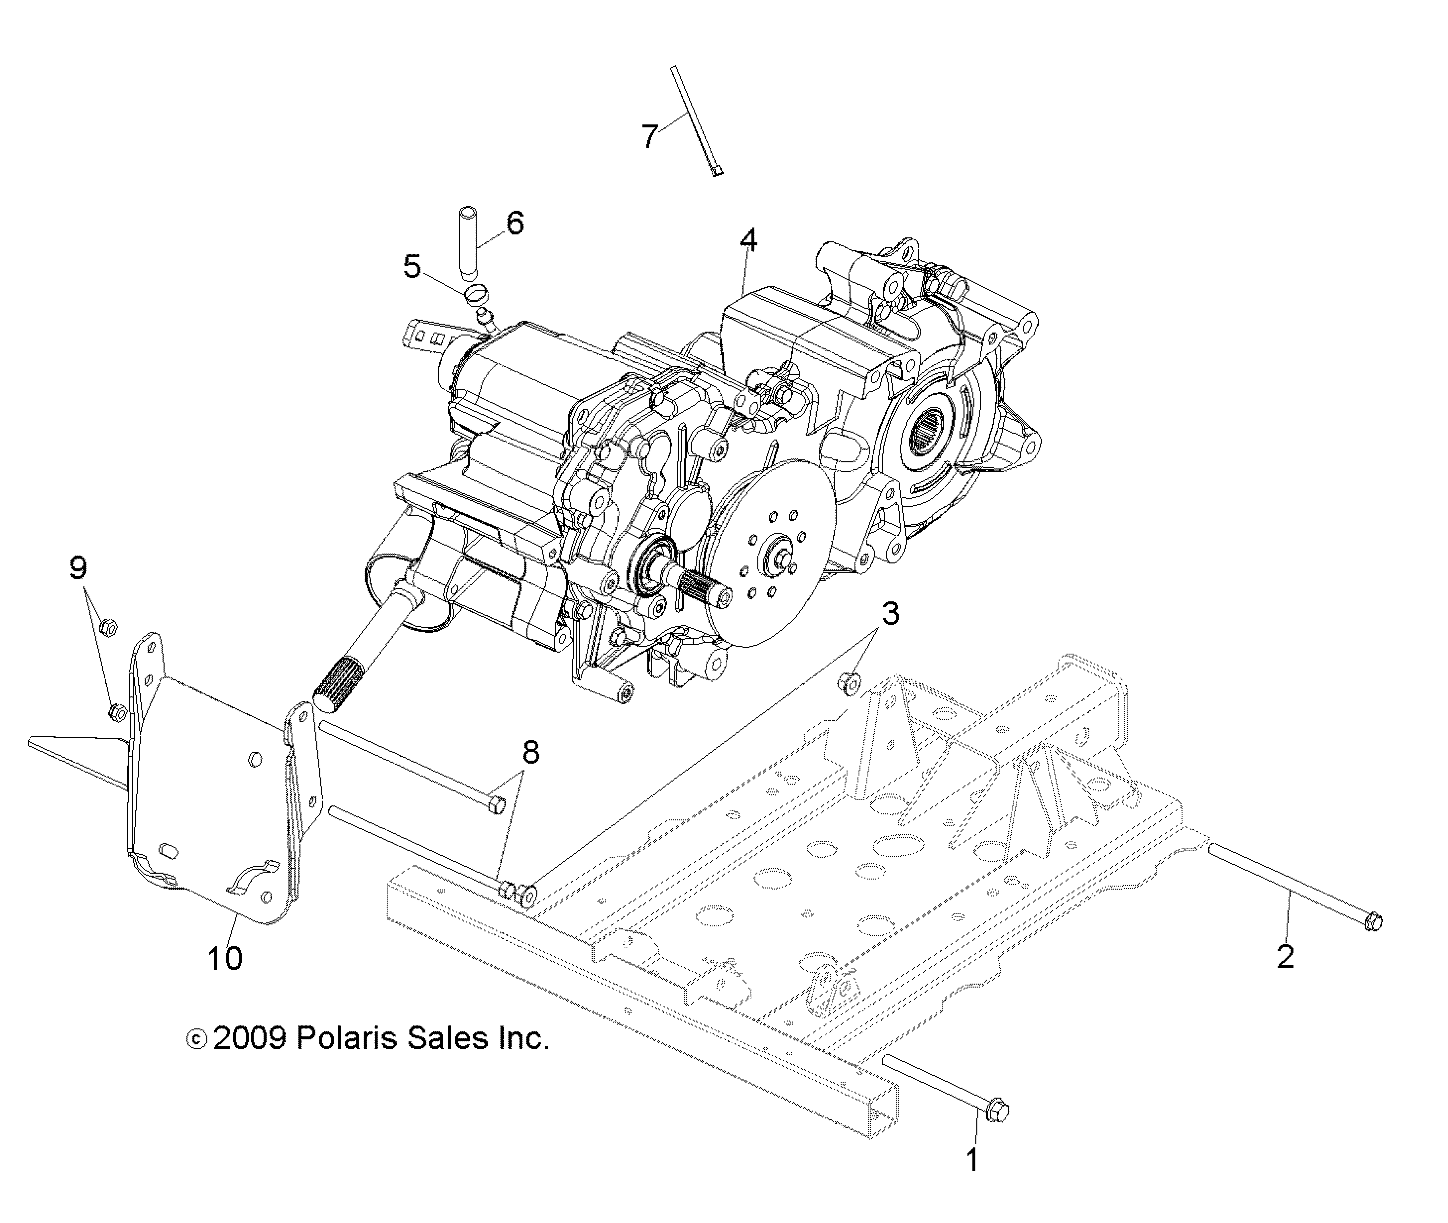 Part Number : 1332898 MAIN GEARCASE ASSEMBLY